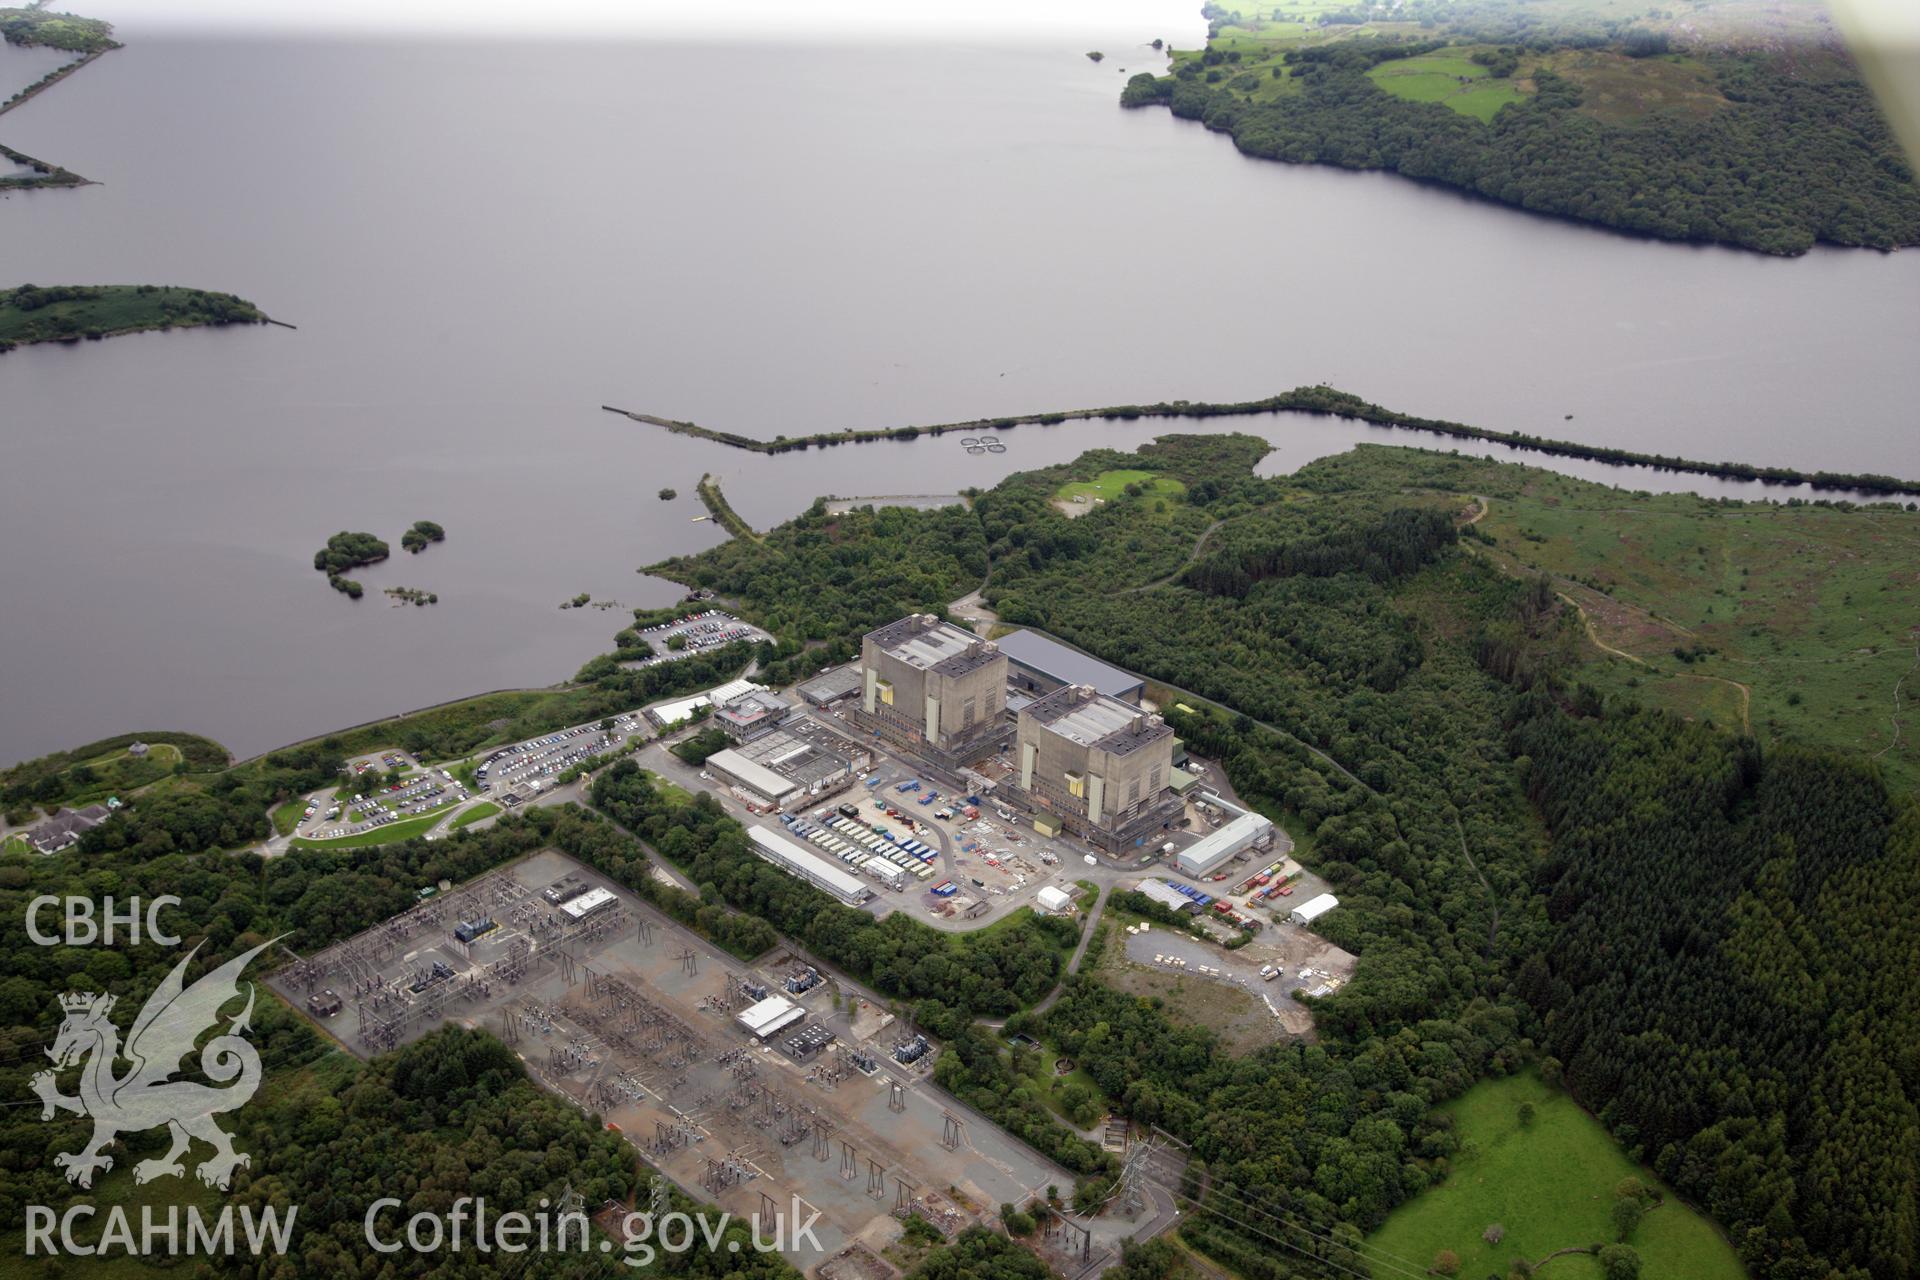 RCAHMW colour oblique photograph of Trawsfynydd Power Station, Gellilydan. Taken by Toby Driver on 17/08/2011.